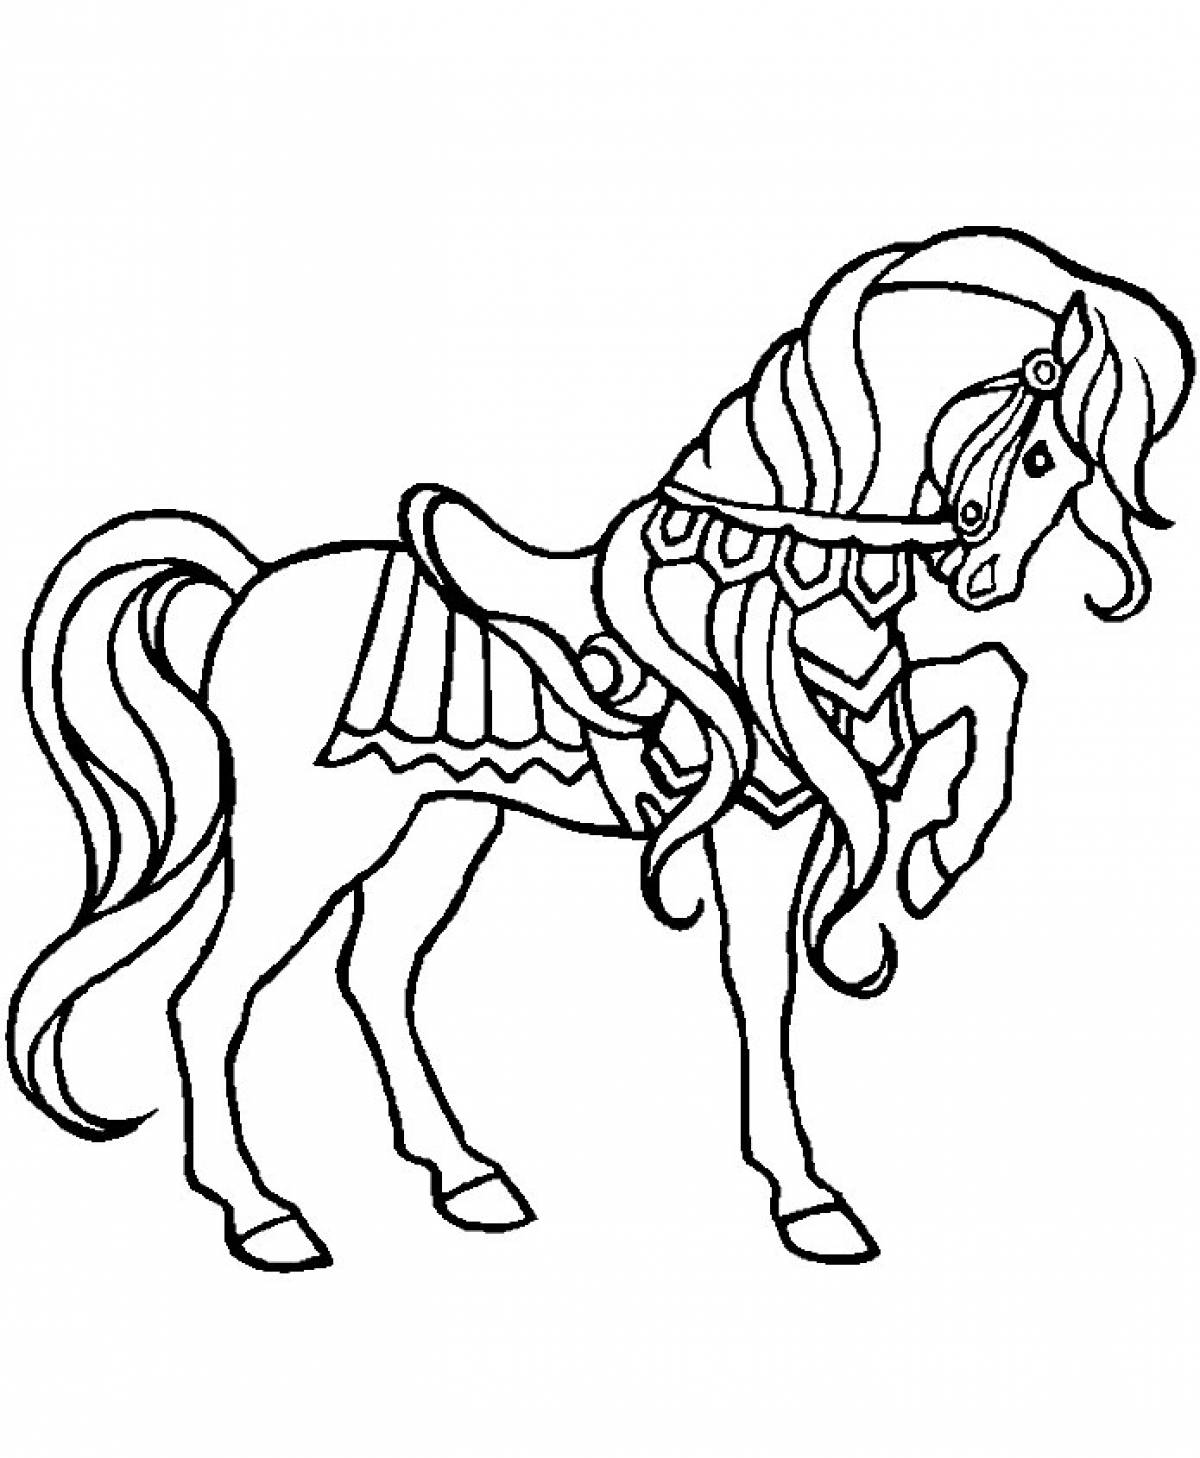 Horse coloring book